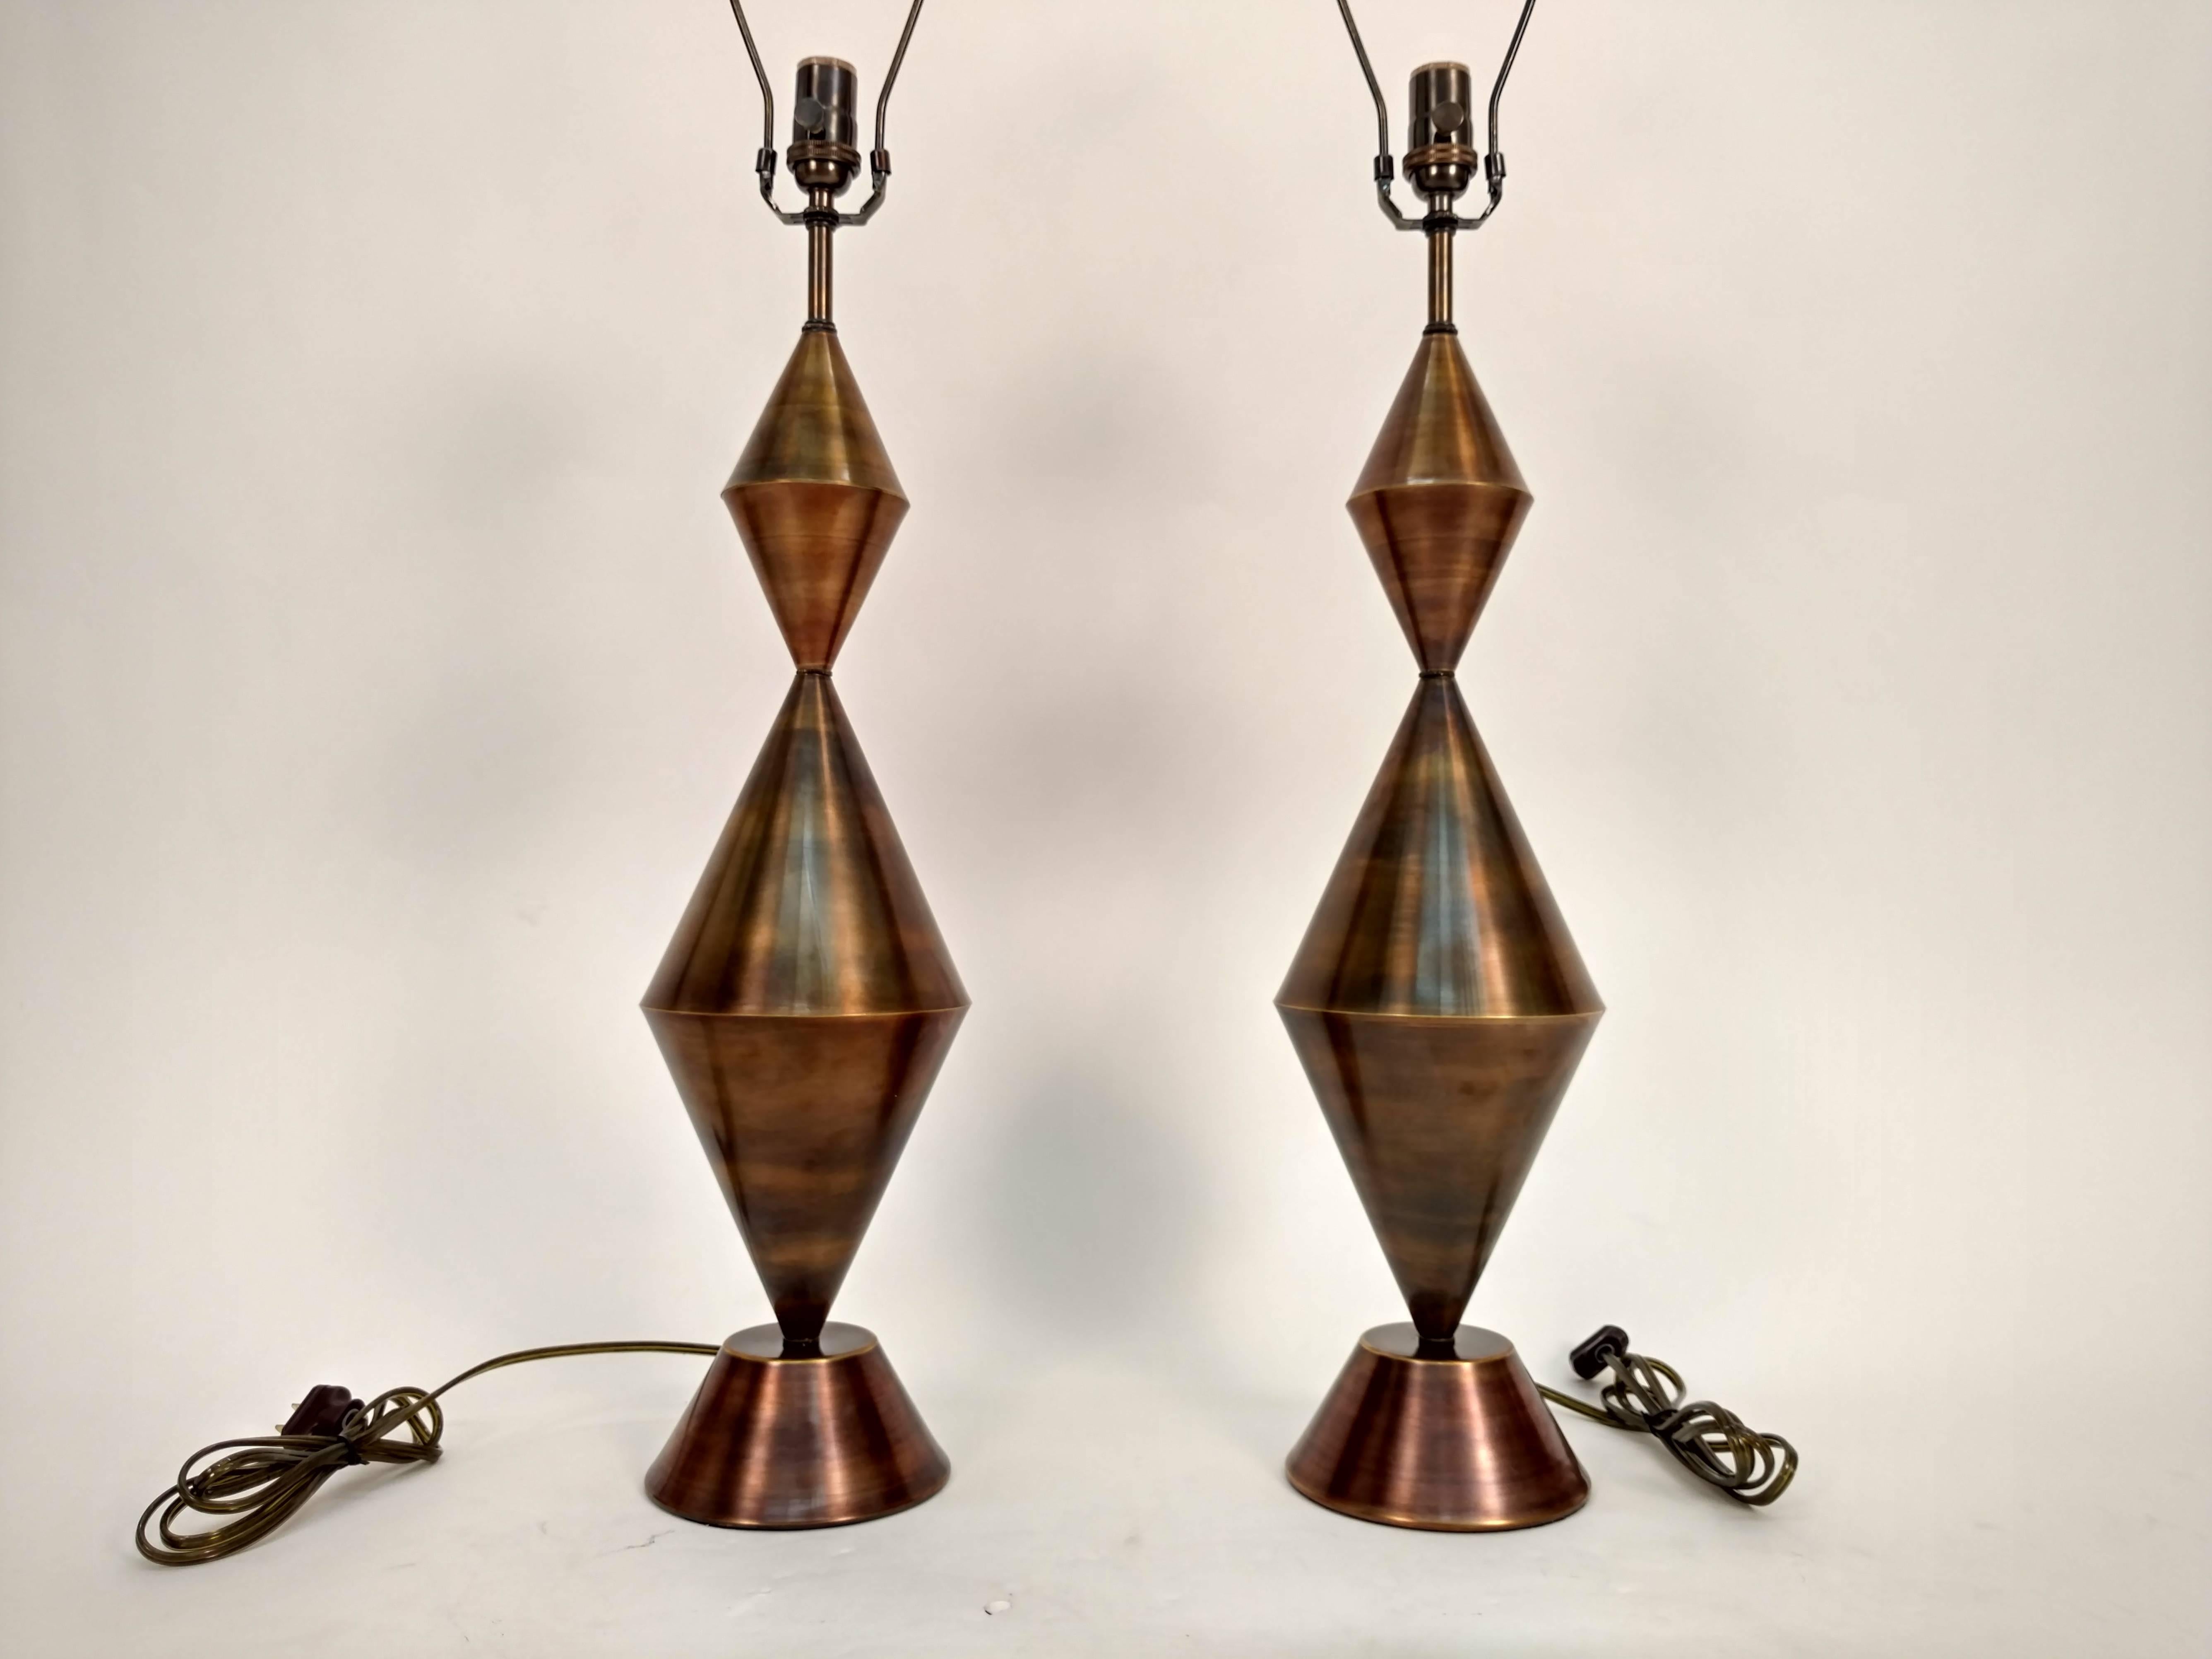 Contemporary Pair of Antique Brass Conical Table Lamps Handcrafted